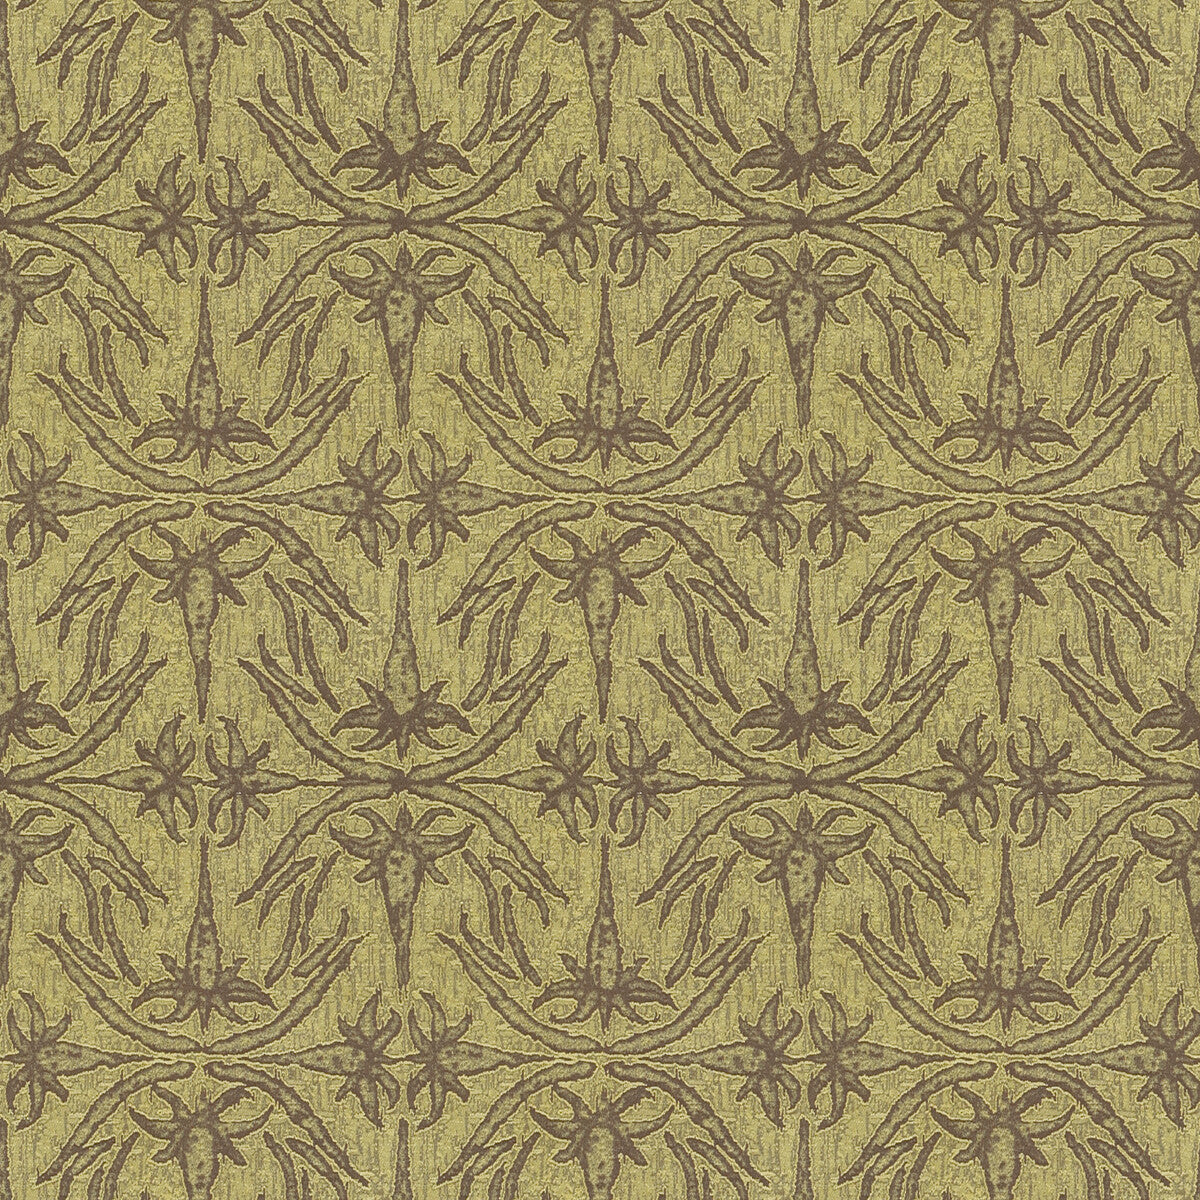 Lily Branch fabric in lime color - pattern GWF-2926.23.0 - by Lee Jofa Modern in the Allegra Hicks II collection